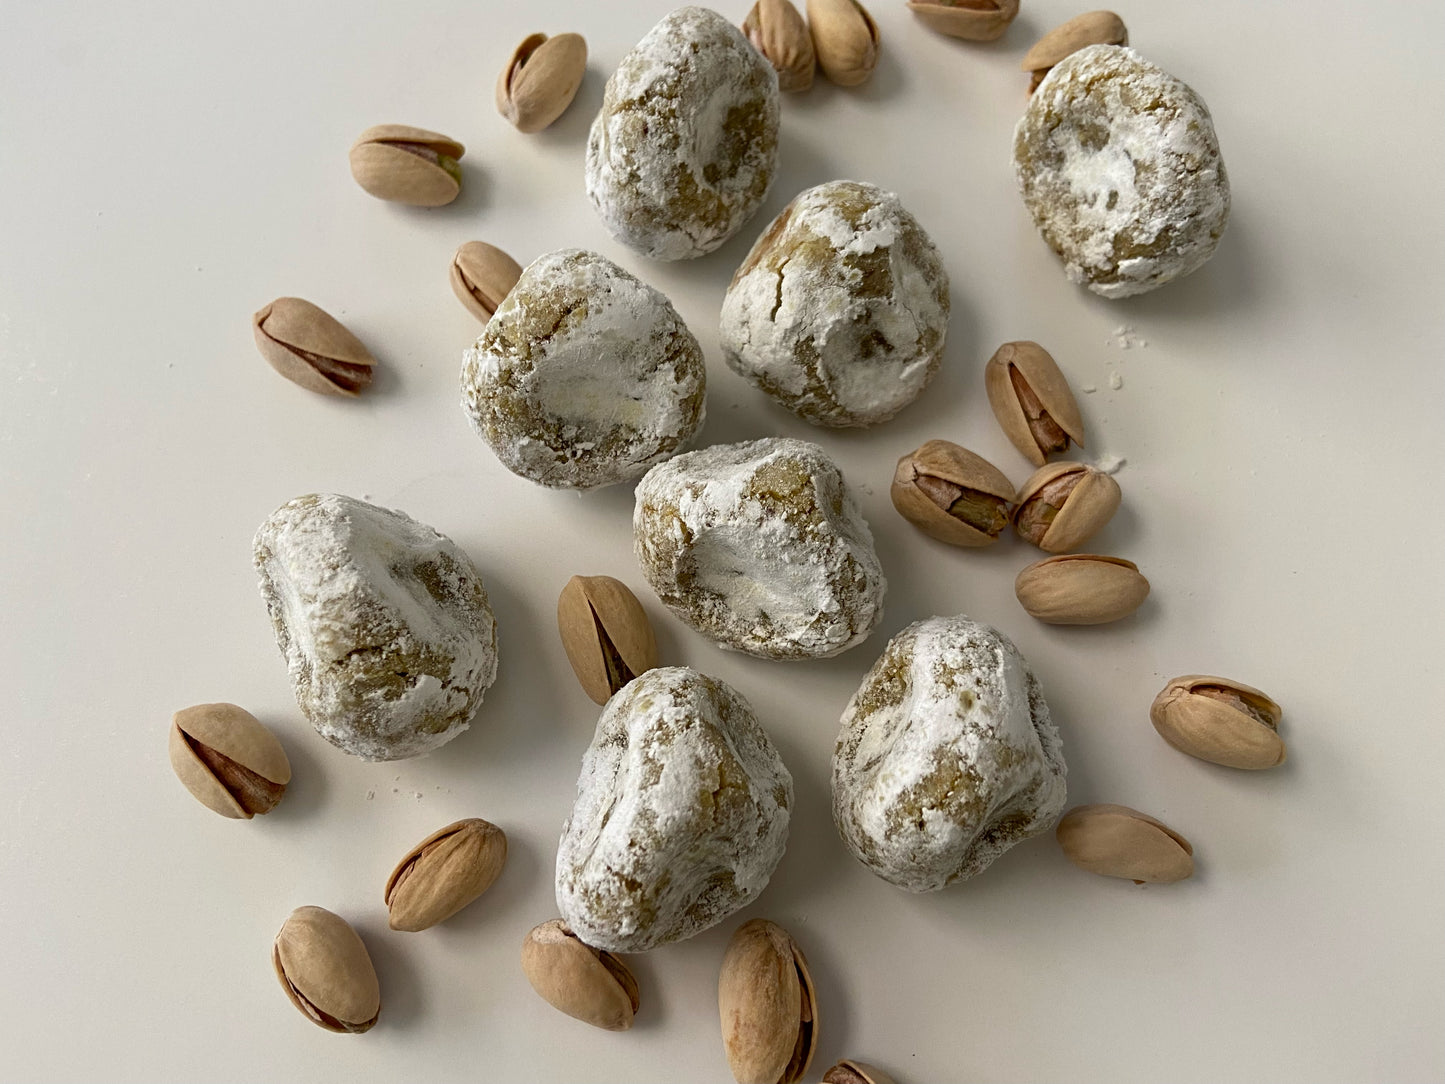 Italian style gluten free Soft almond cookies, pistachio flavor along with roasted pistachios over a white background